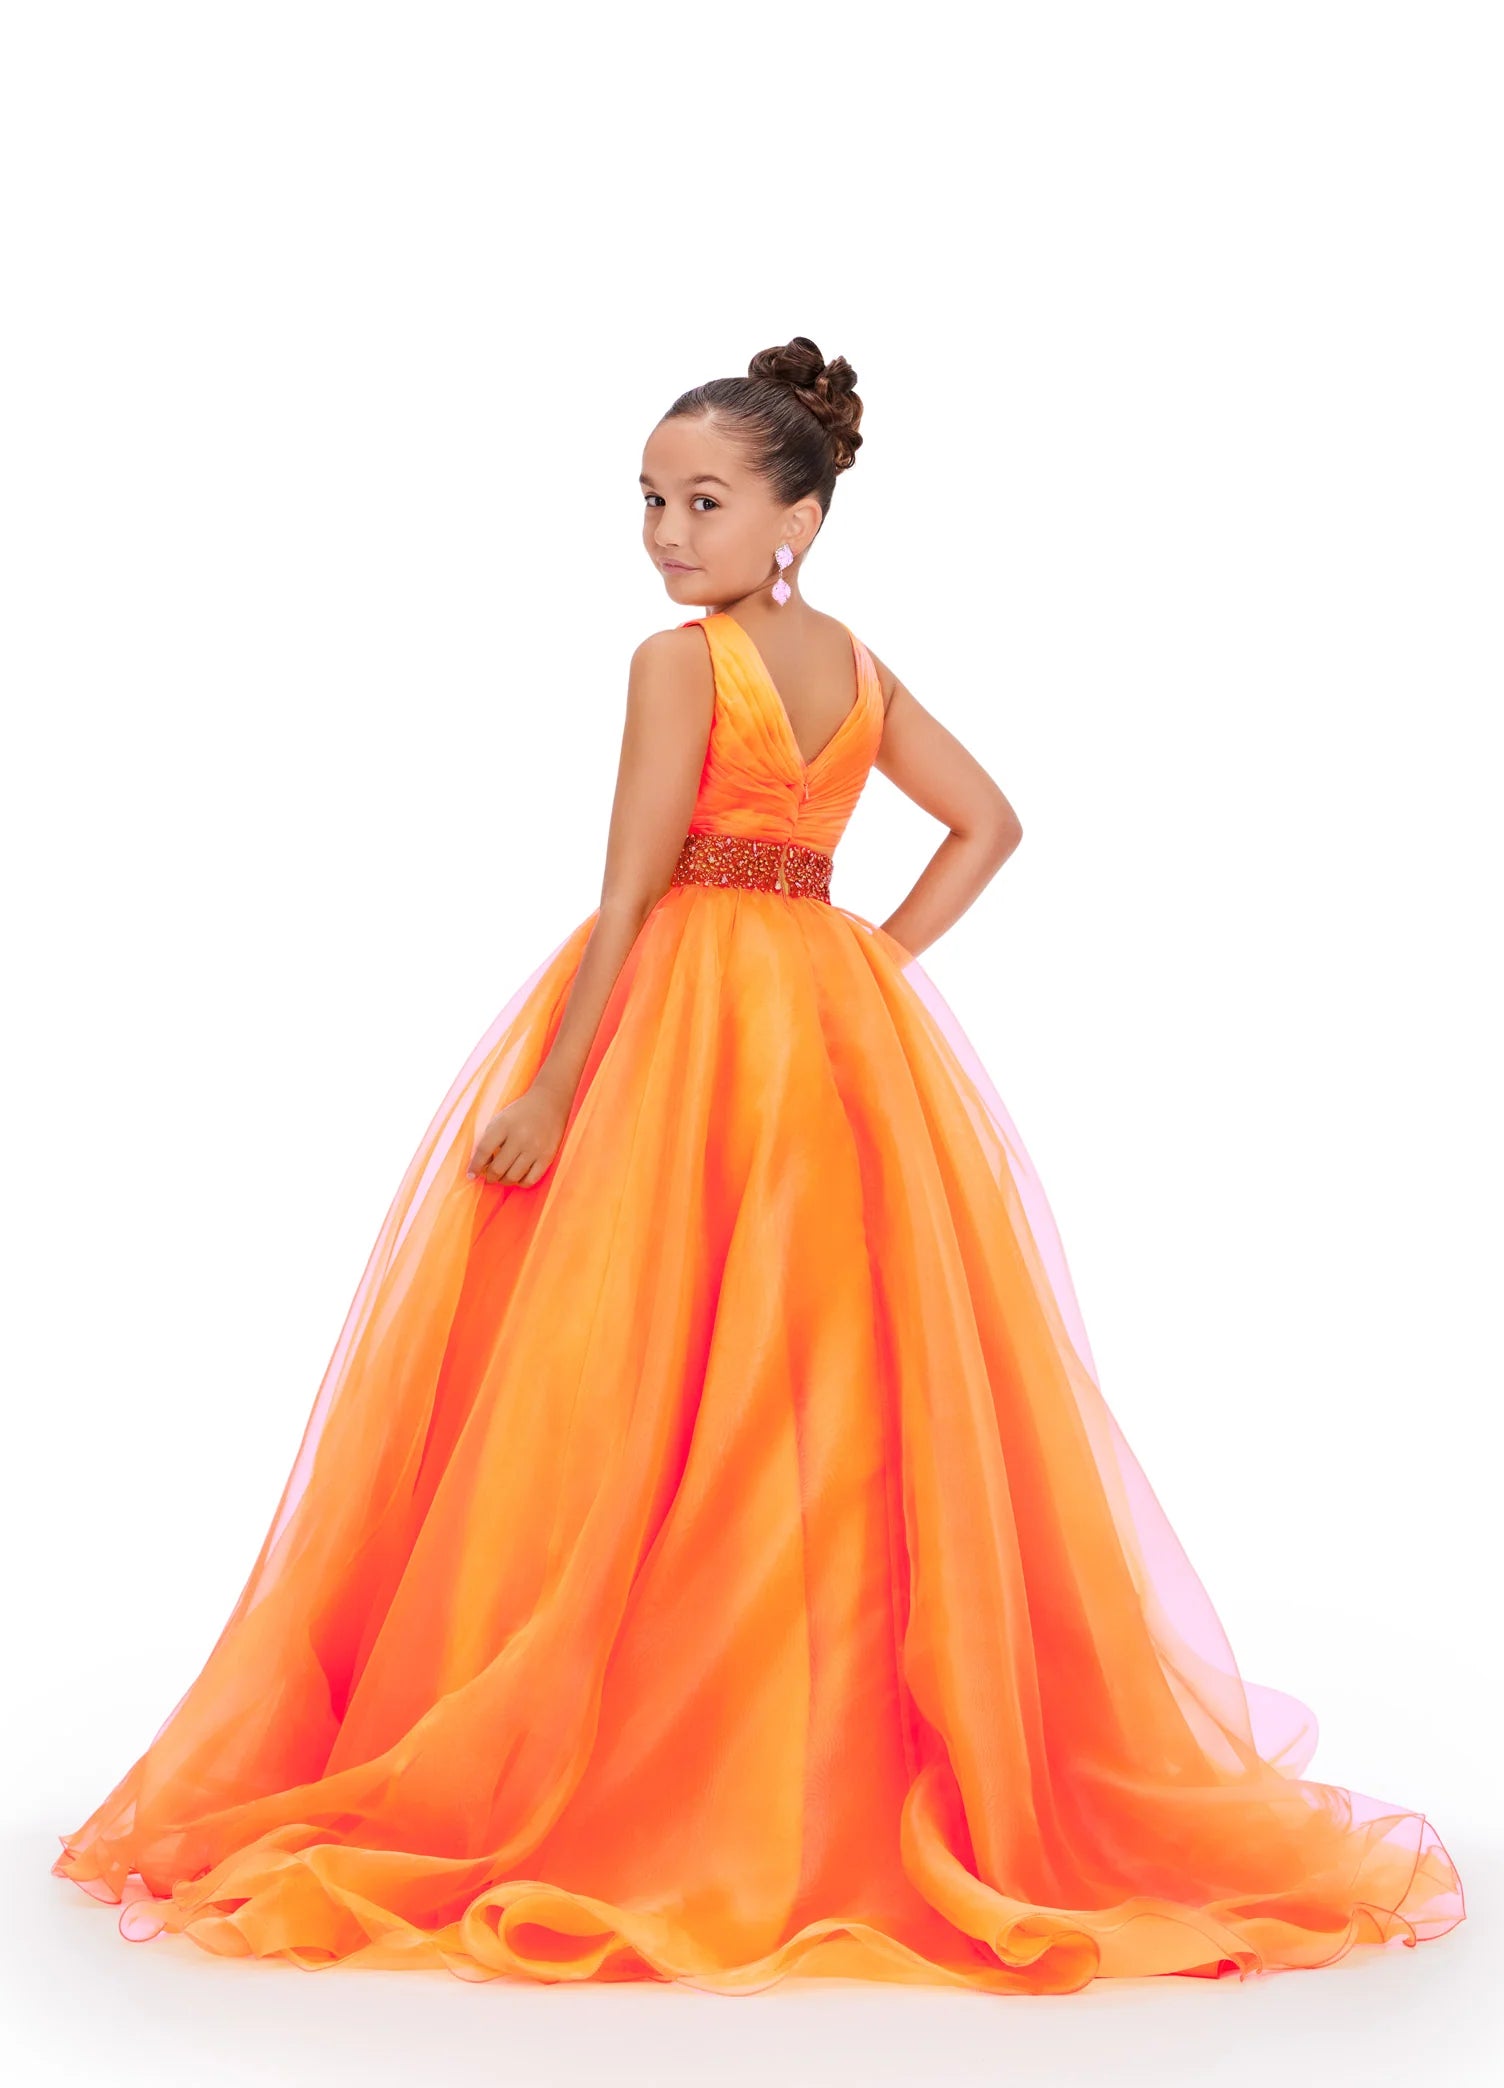 Expertly designed for young pageant contestants, the Ashley Lauren Kids 8249 dress combines a classic A-line silhouette with a modern V-neckline and sparkling crystal belt. Made from luxurious organza fabric, this dress is both elegant and comfortable, ensuring your child will look and feel their best on stage.